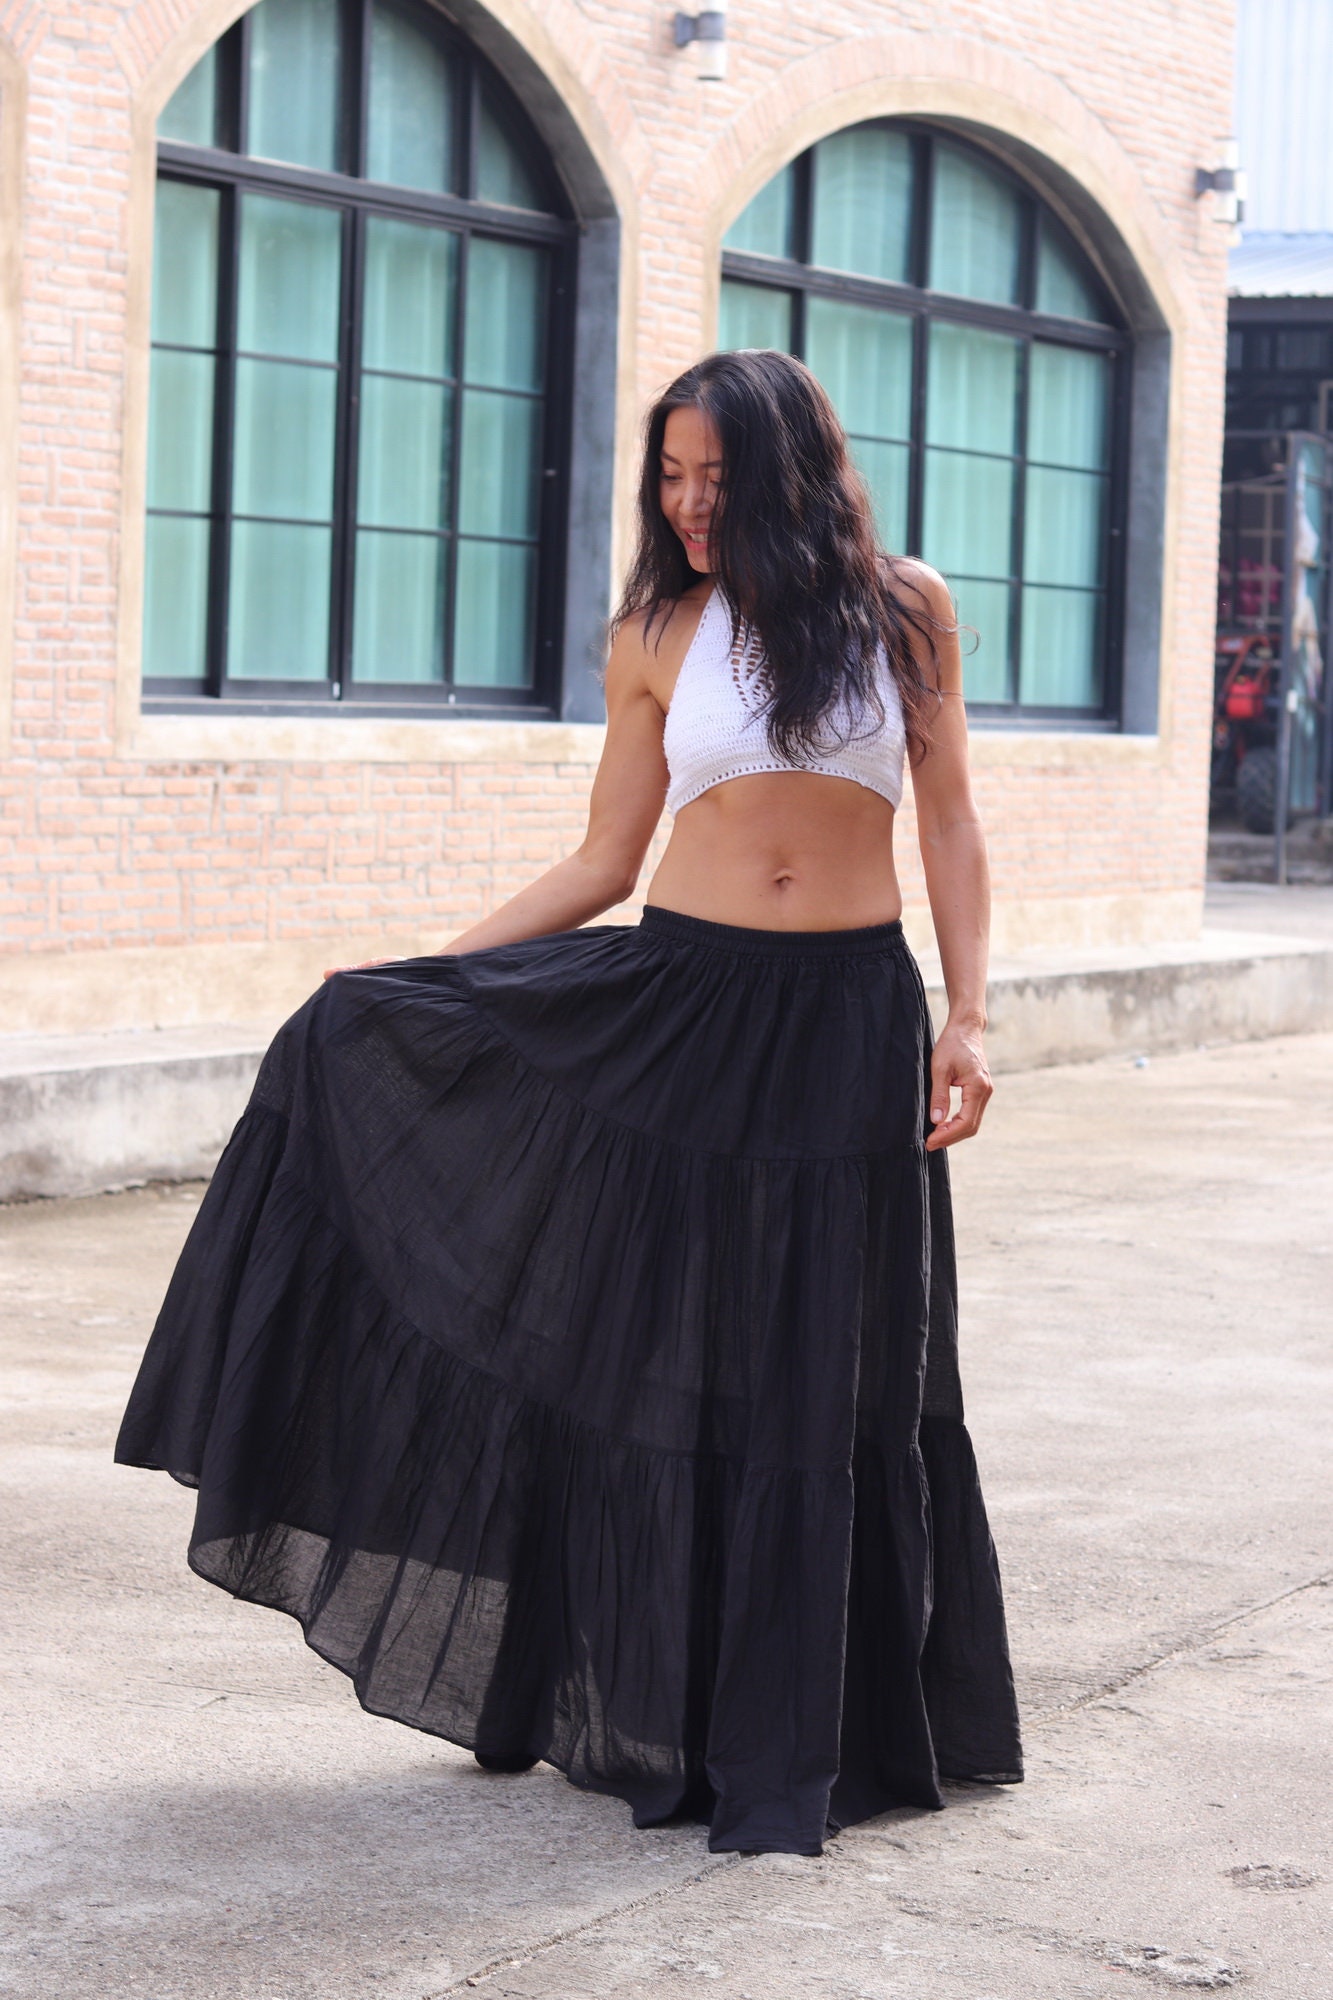 Camilla' Maxi Skirt | Maxi skirt, Maxi skirt outfits, Modest outfits